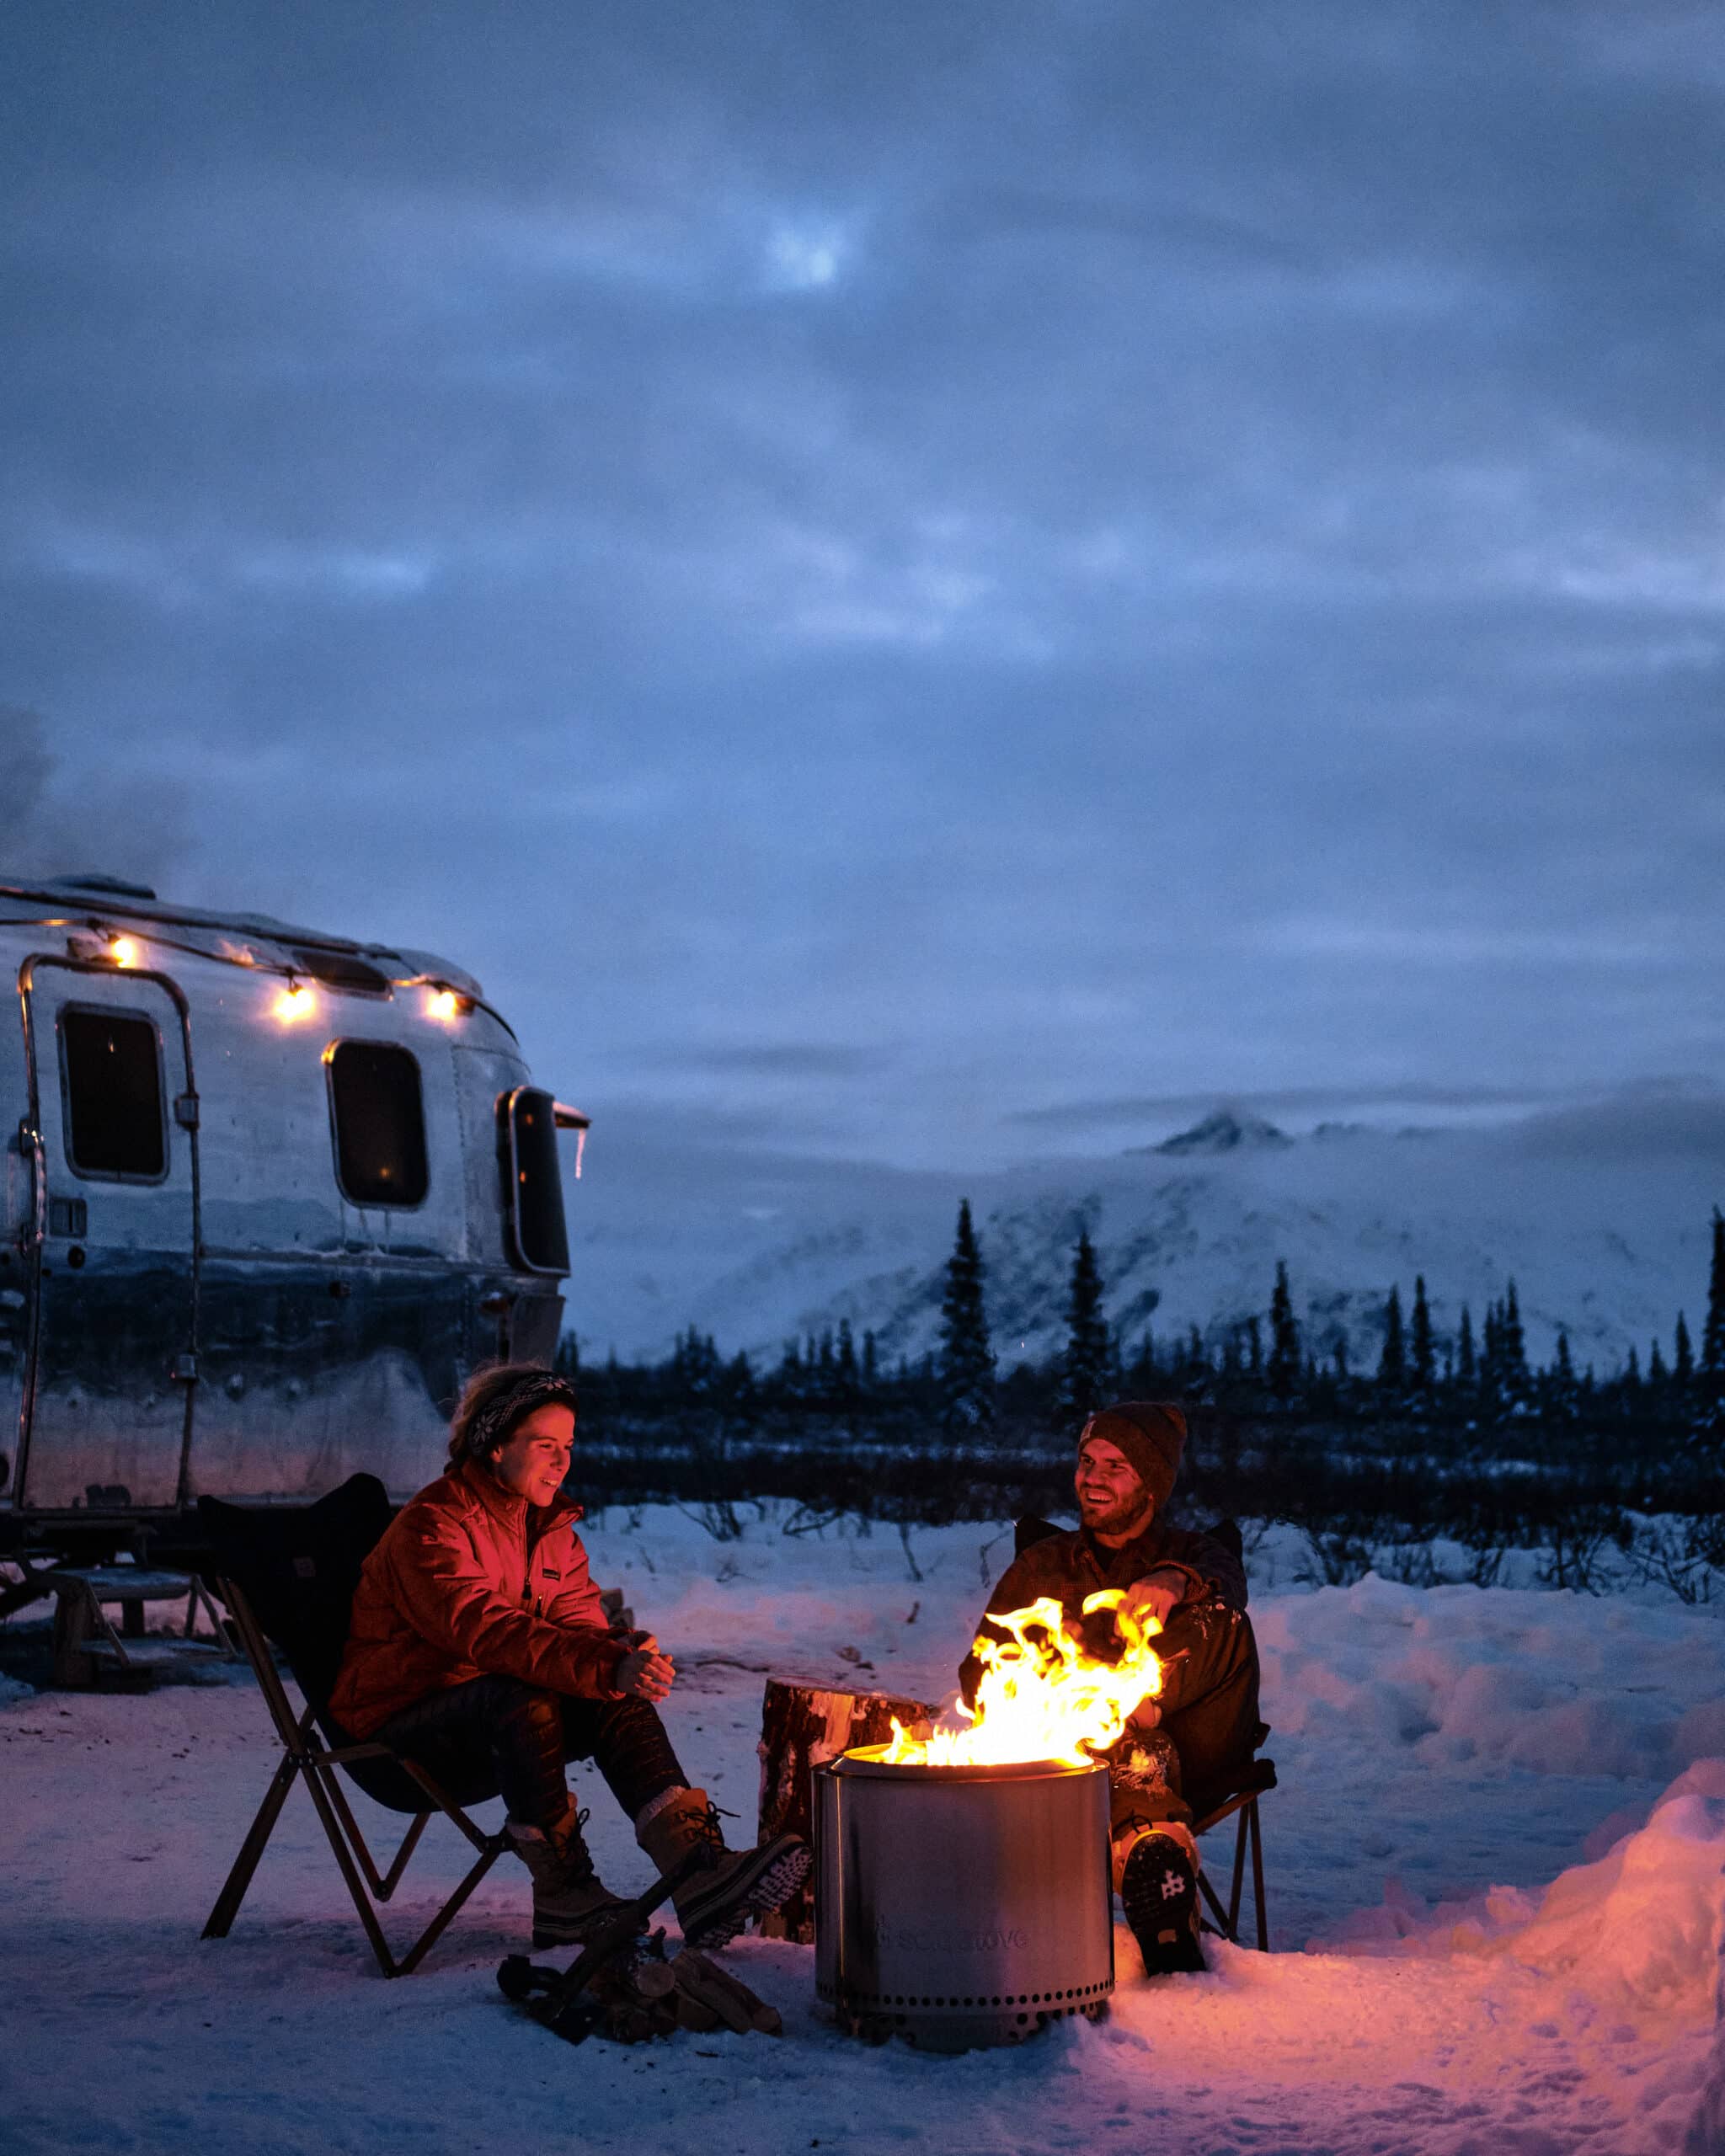 Two People Enjoying a Campfire in the Snow at Night in Alaska